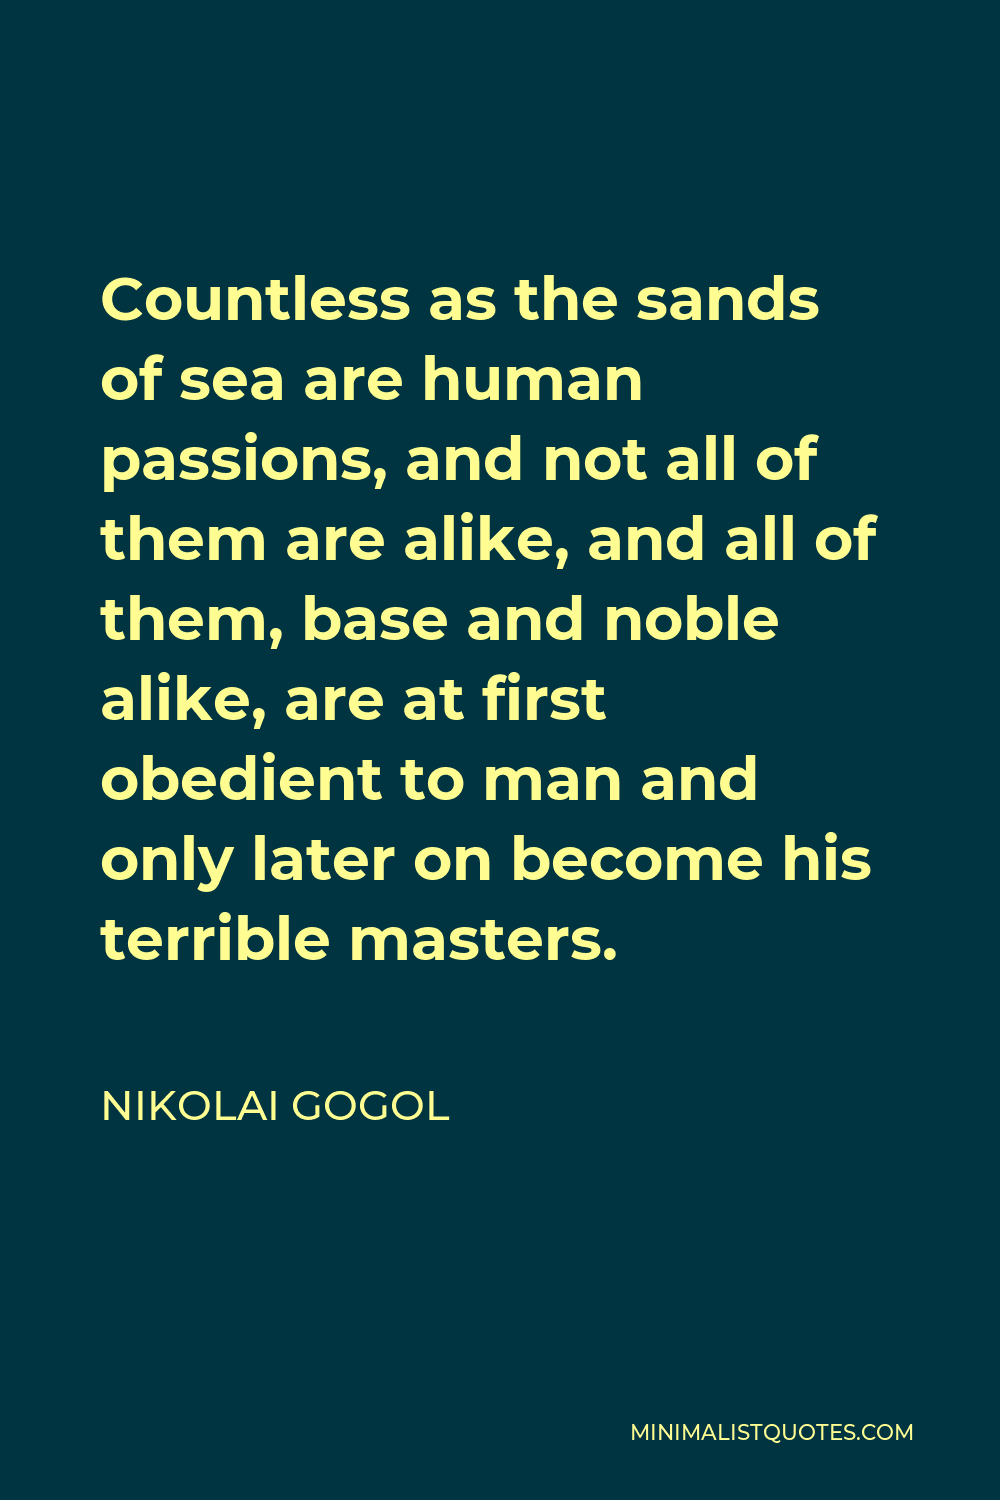 Nikolai Gogol Quote - Countless as the sands of sea are human passions, and not all of them are alike, and all of them, base and noble alike, are at first obedient to man and only later on become his terrible masters.